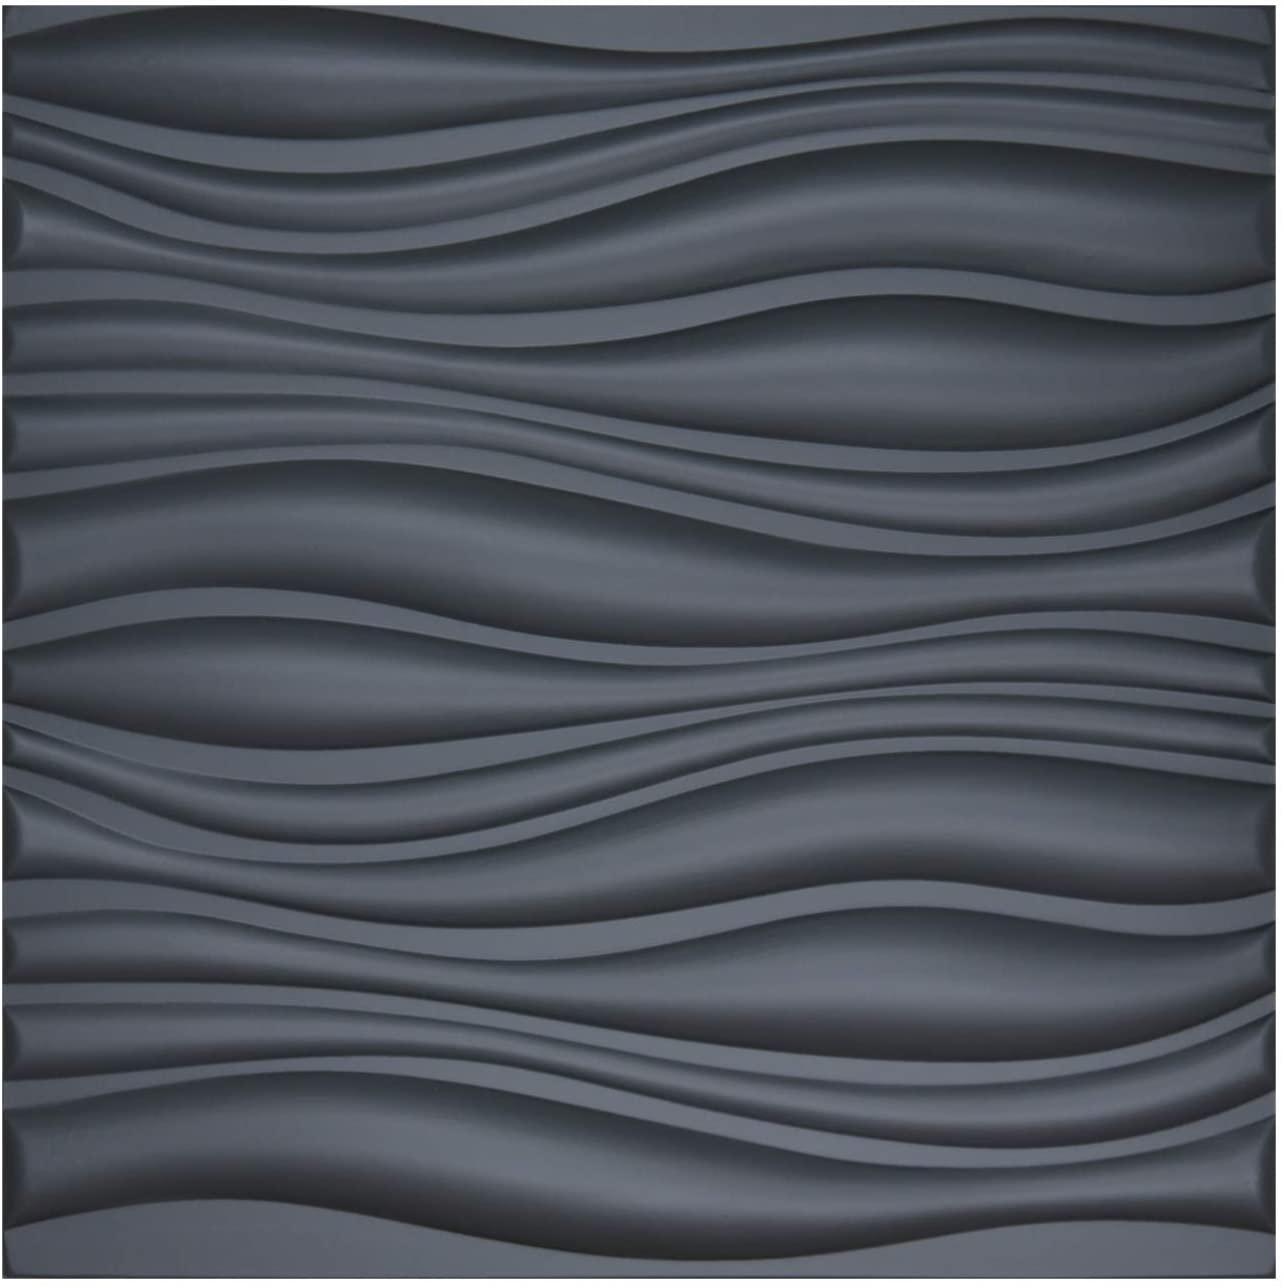 A12064- Leather 3D Textured Wall Covering PU Material Panels Wave Wall 23.6x23.6 In (1 Piece)